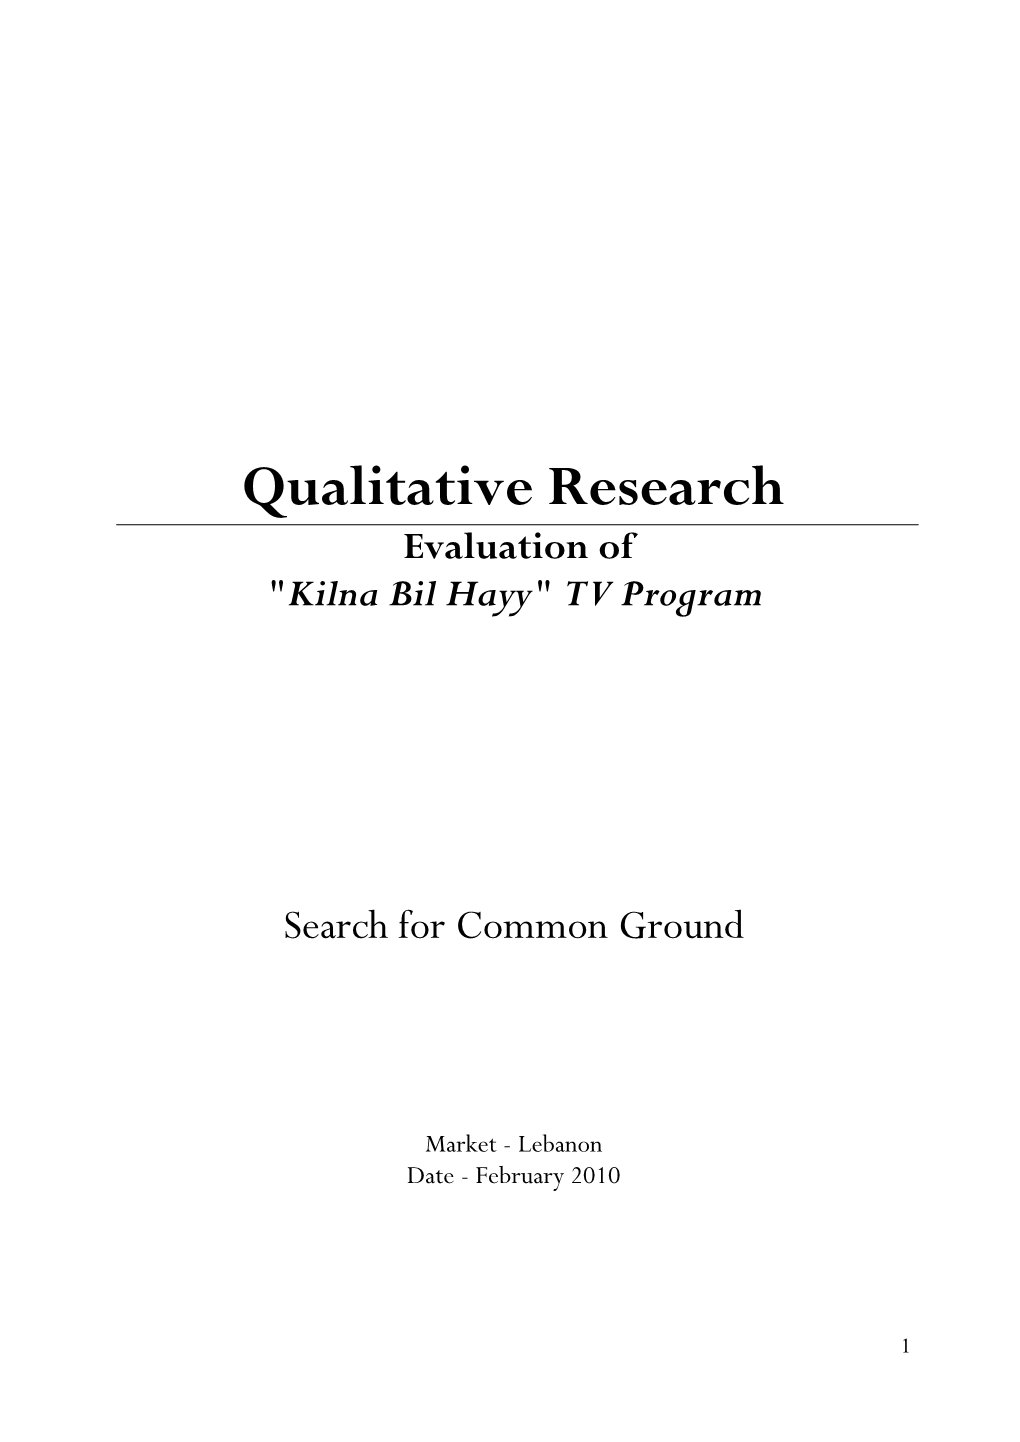 Read the Qualitative Research Evaluation